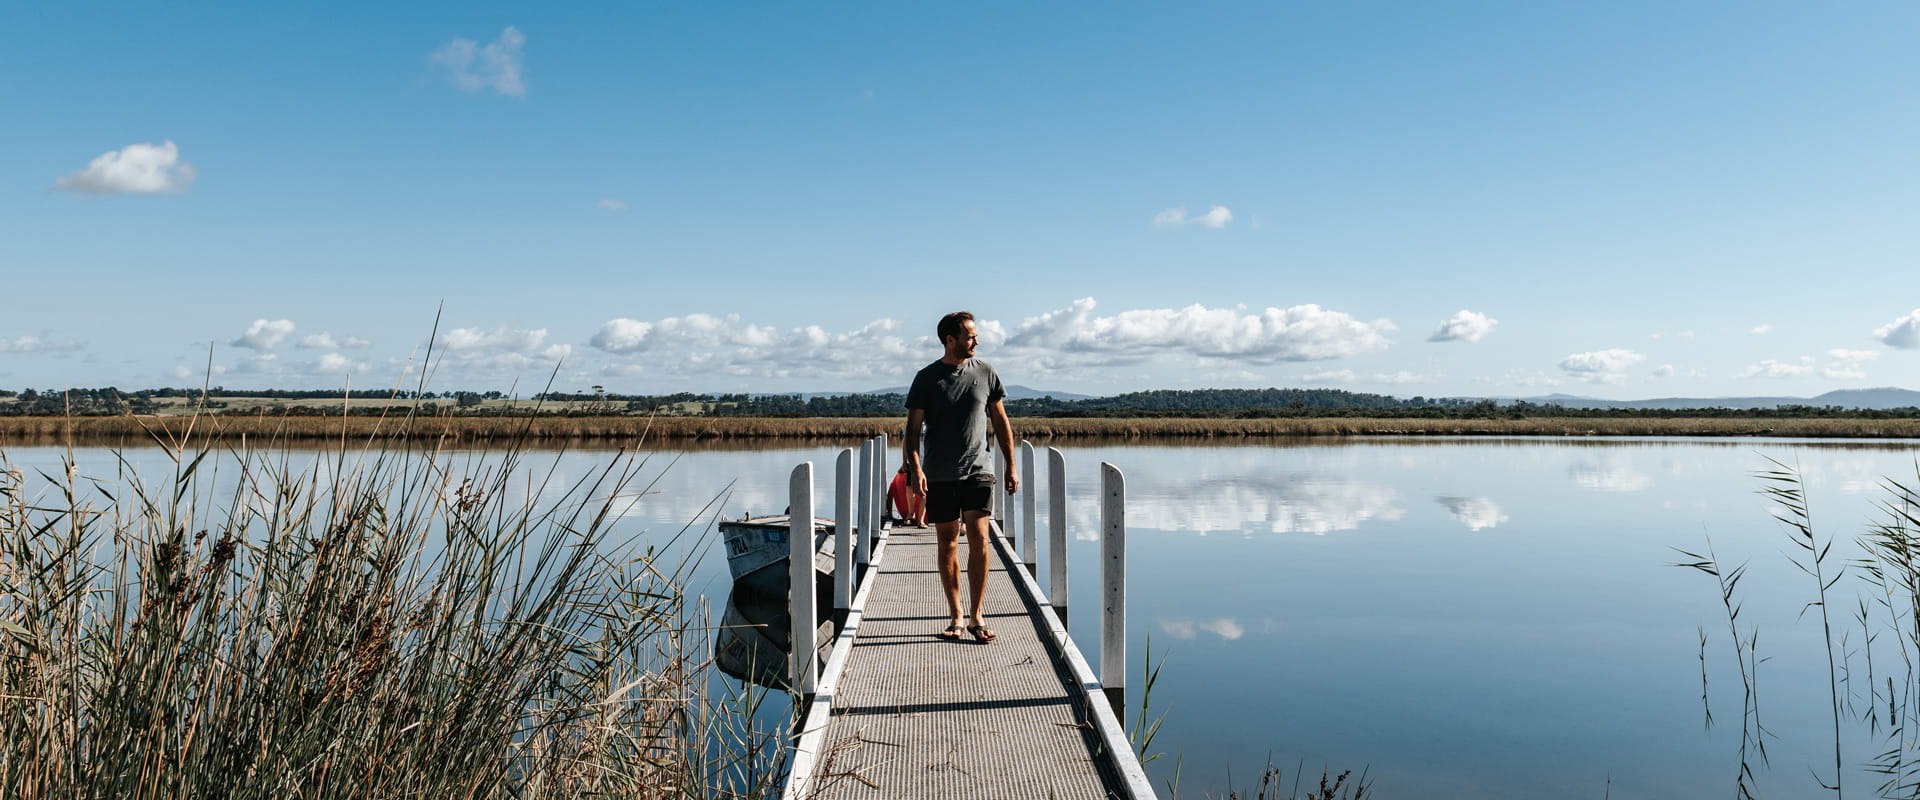 A man walks along a small jetty and looks out over the still waters, with grassland and mountains in the distance behind him.